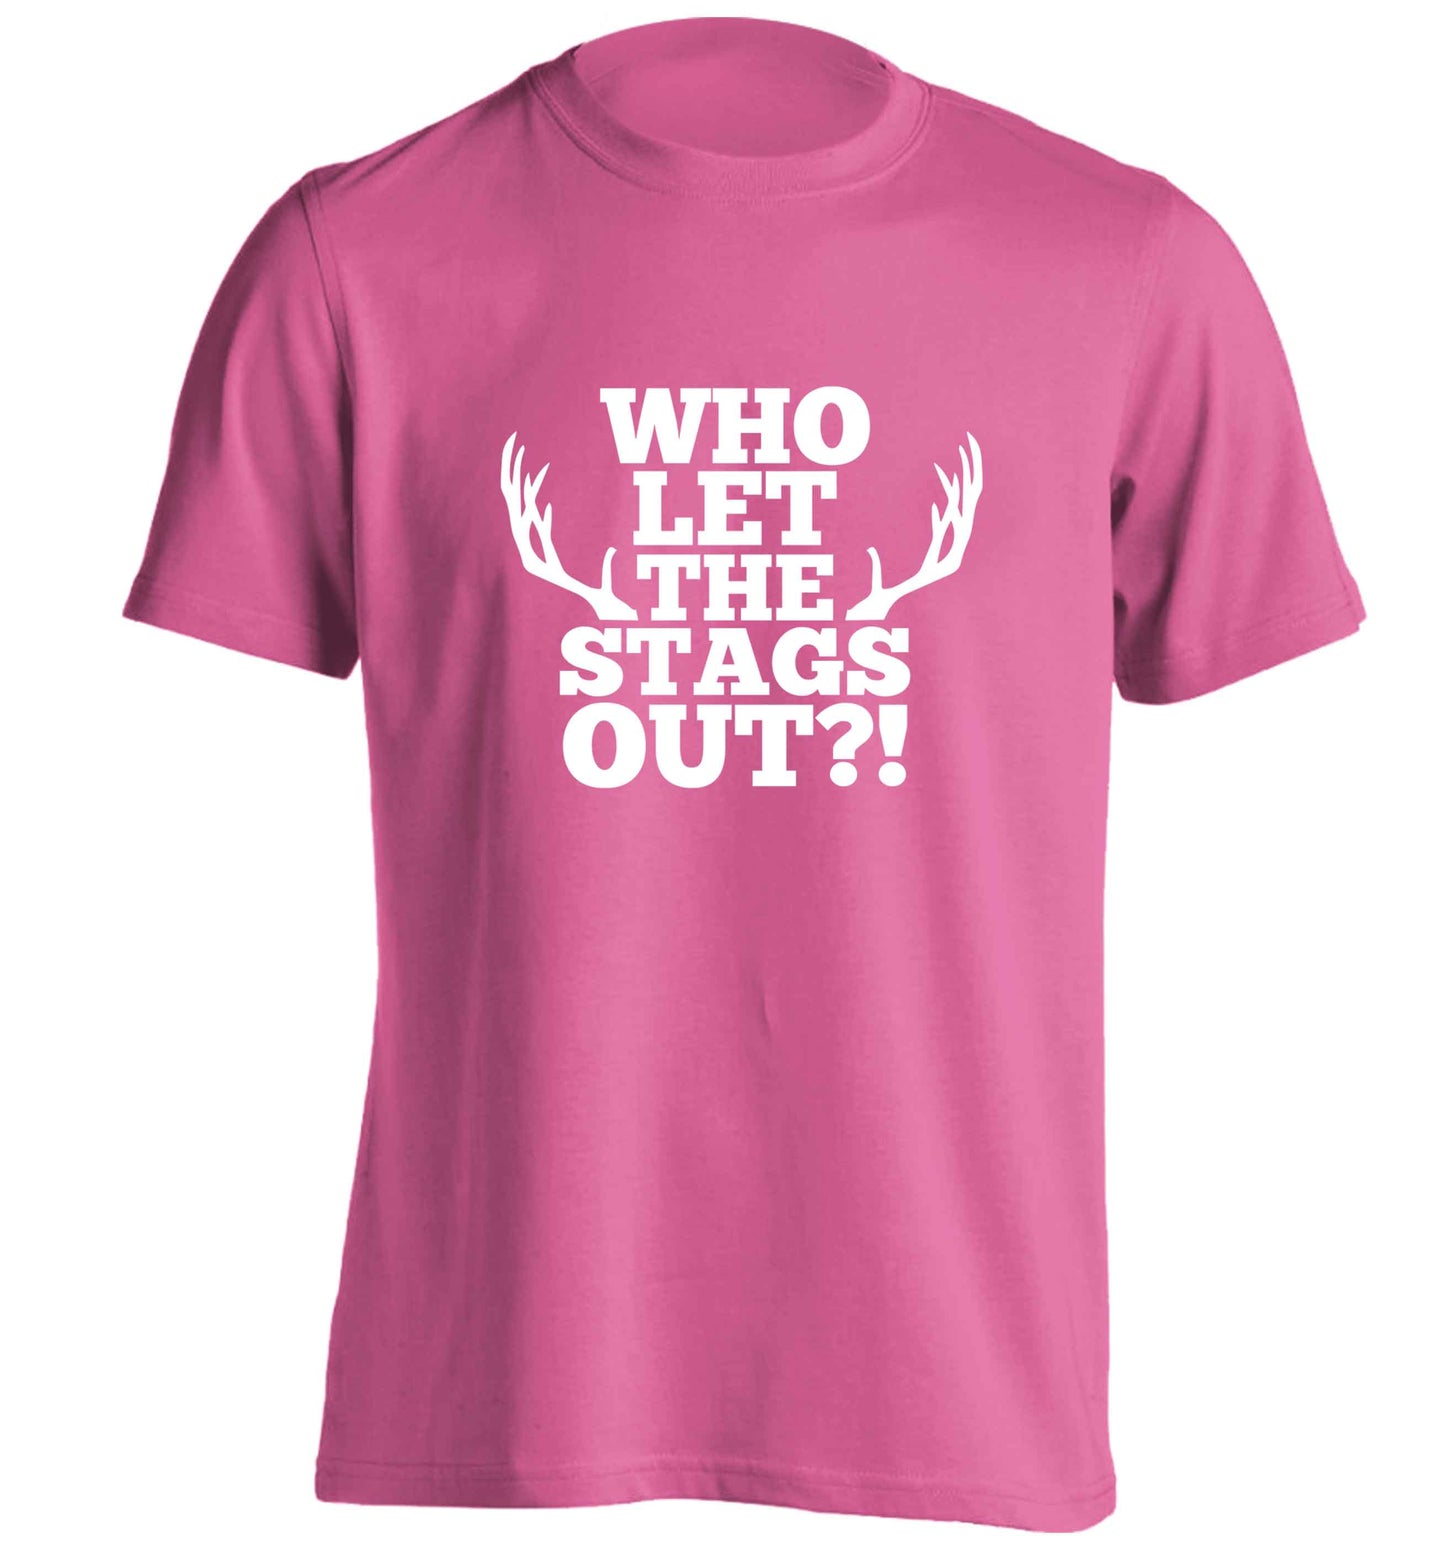 Who let the stags out adults unisex pink Tshirt 2XL